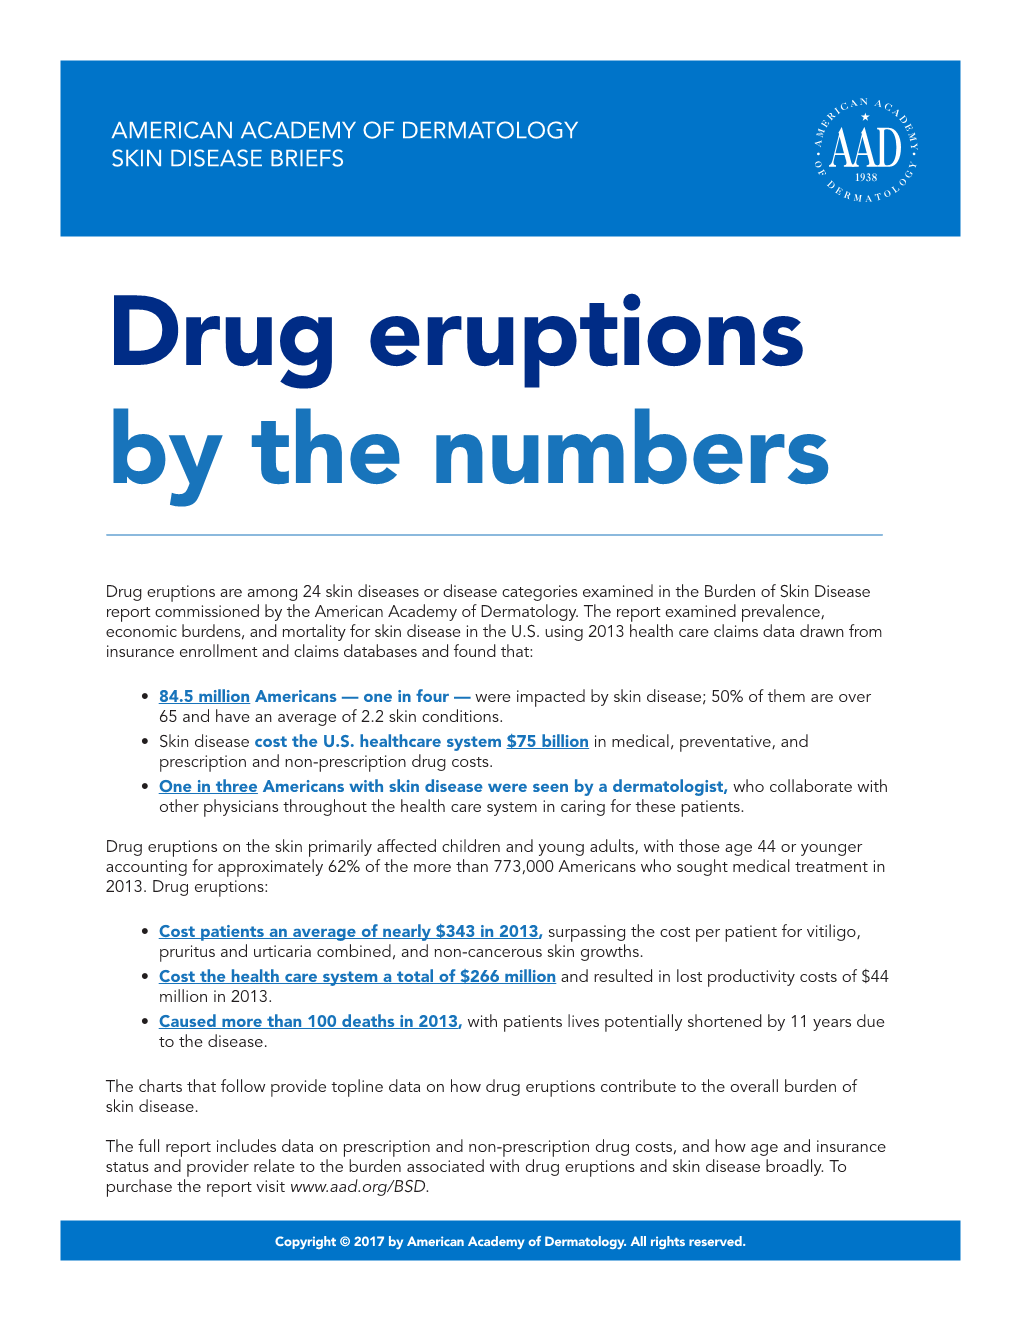 Drug Eruptions by the Numbers